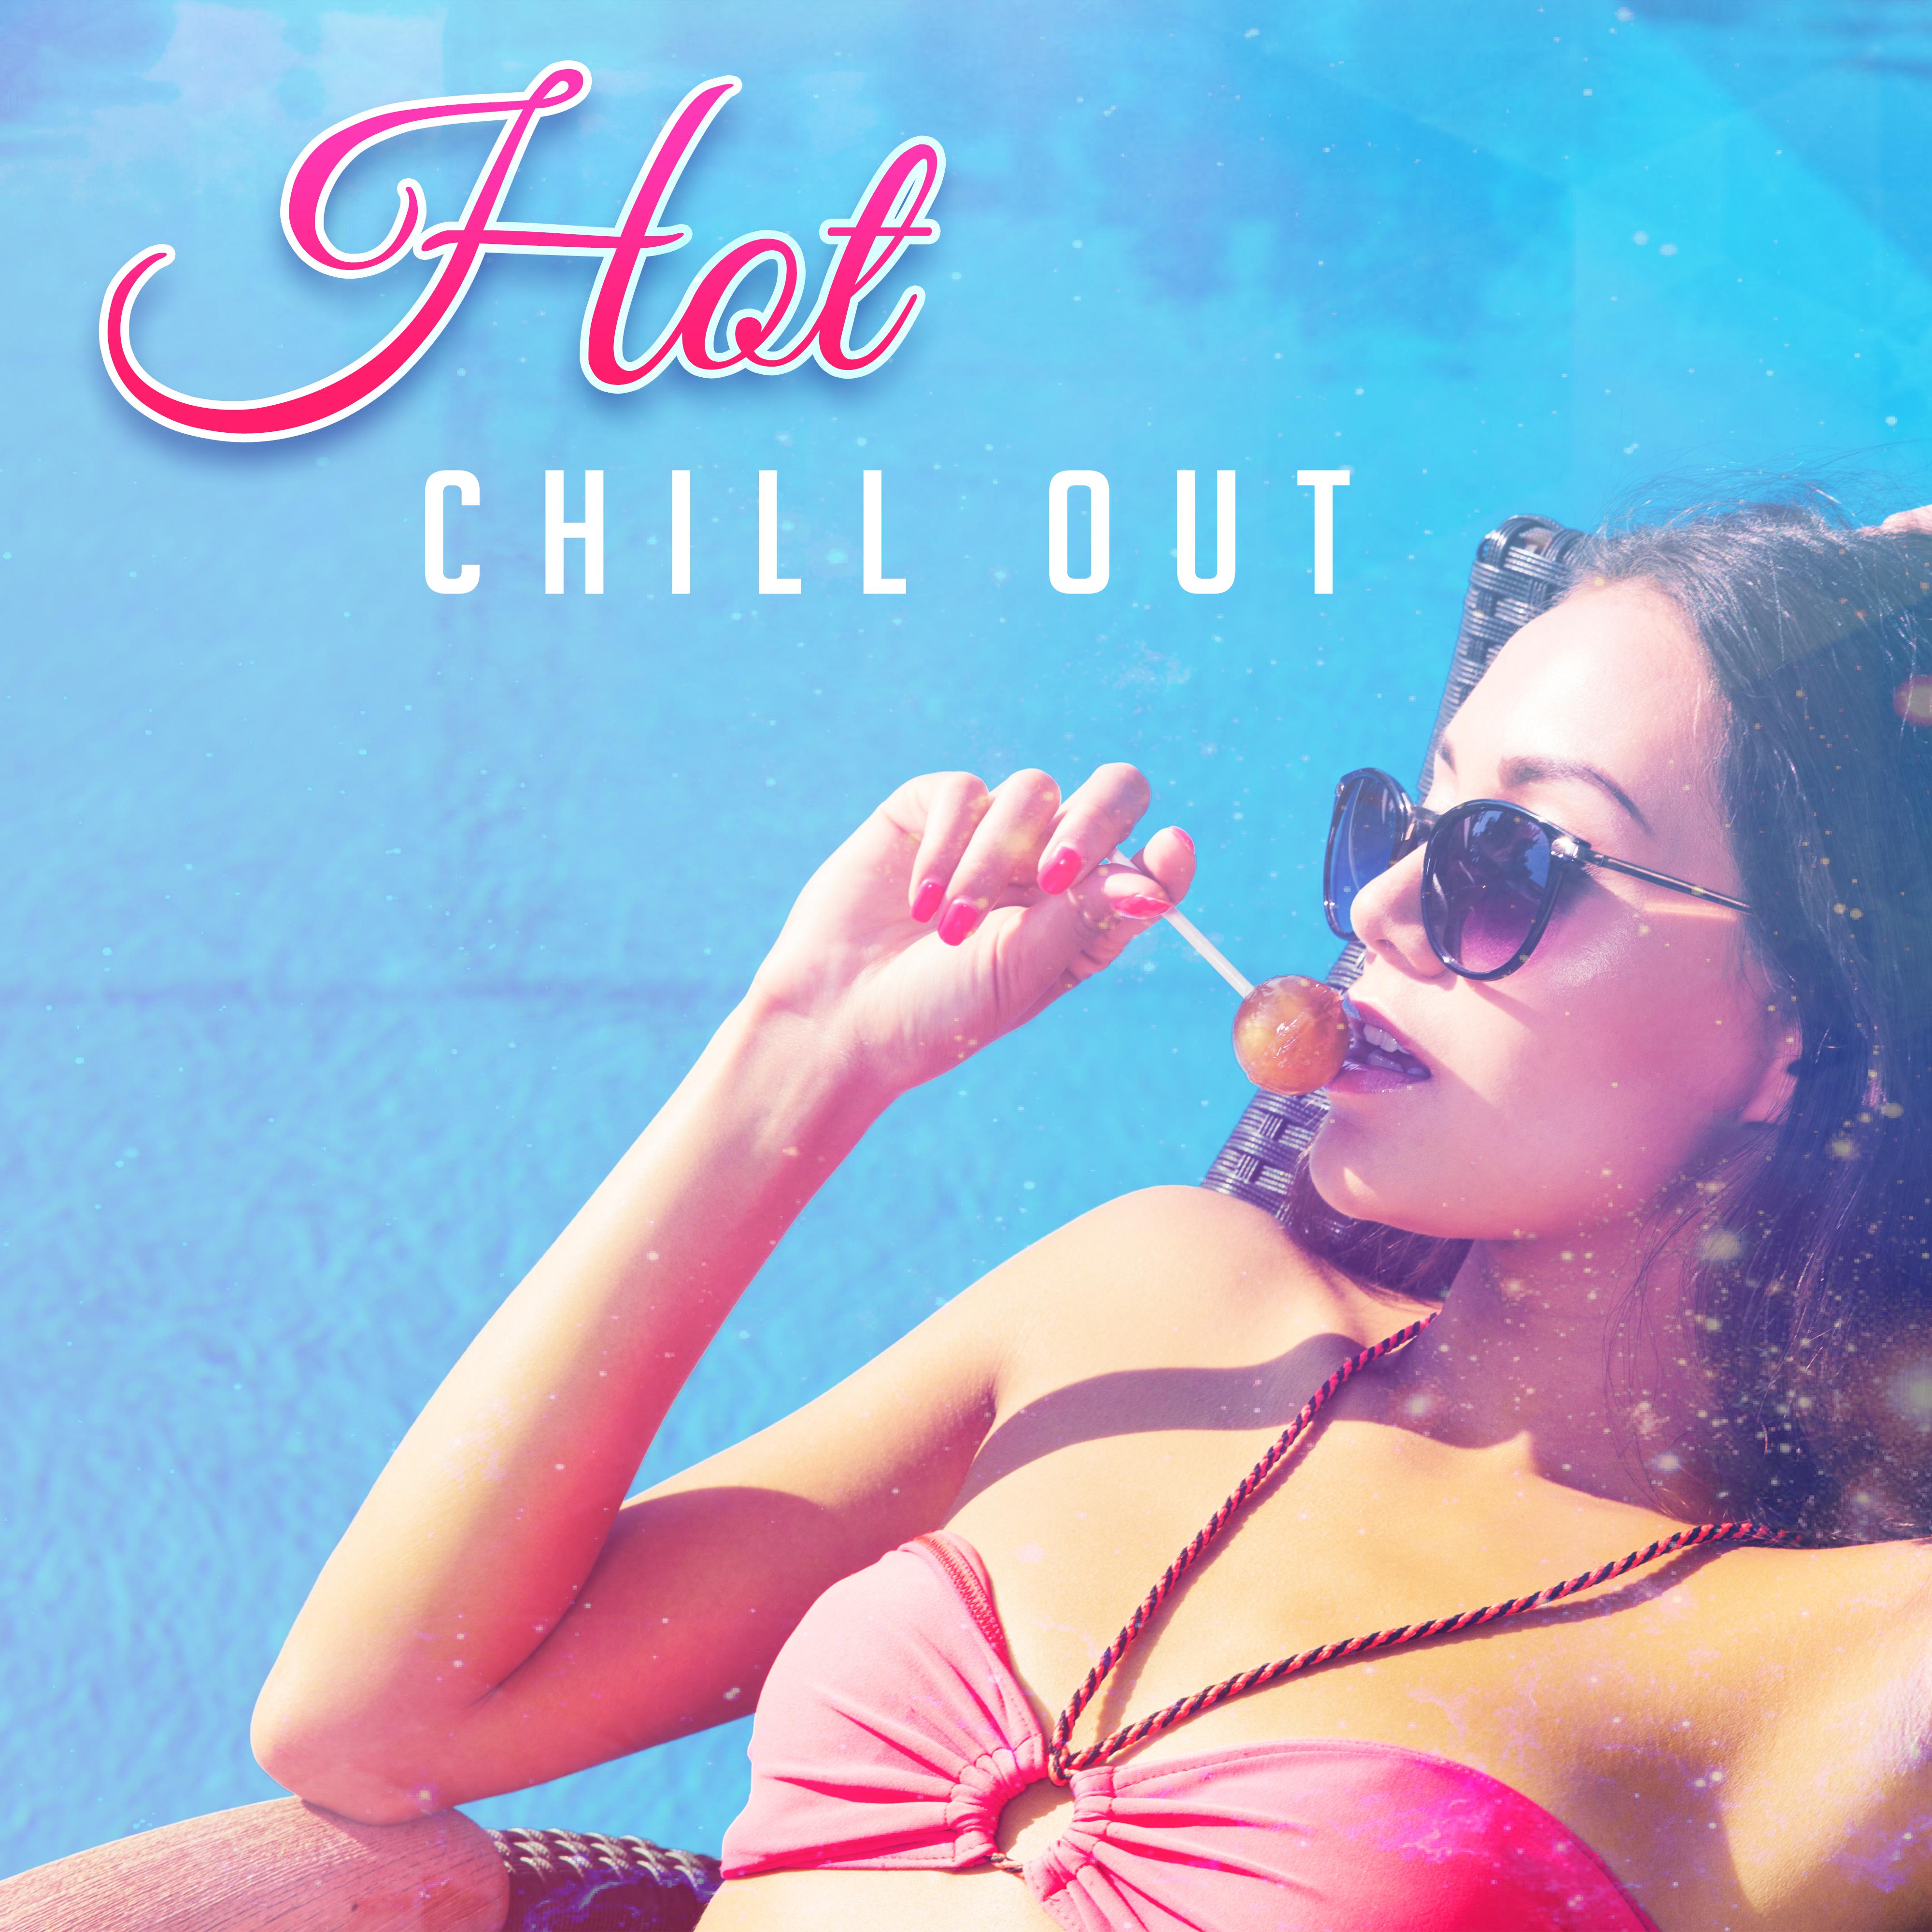 Hot Chill Out – Summer 2017, Ibiza Dance Party, Relax, **** Vibes 69, Sensual Dance, Summer Hits